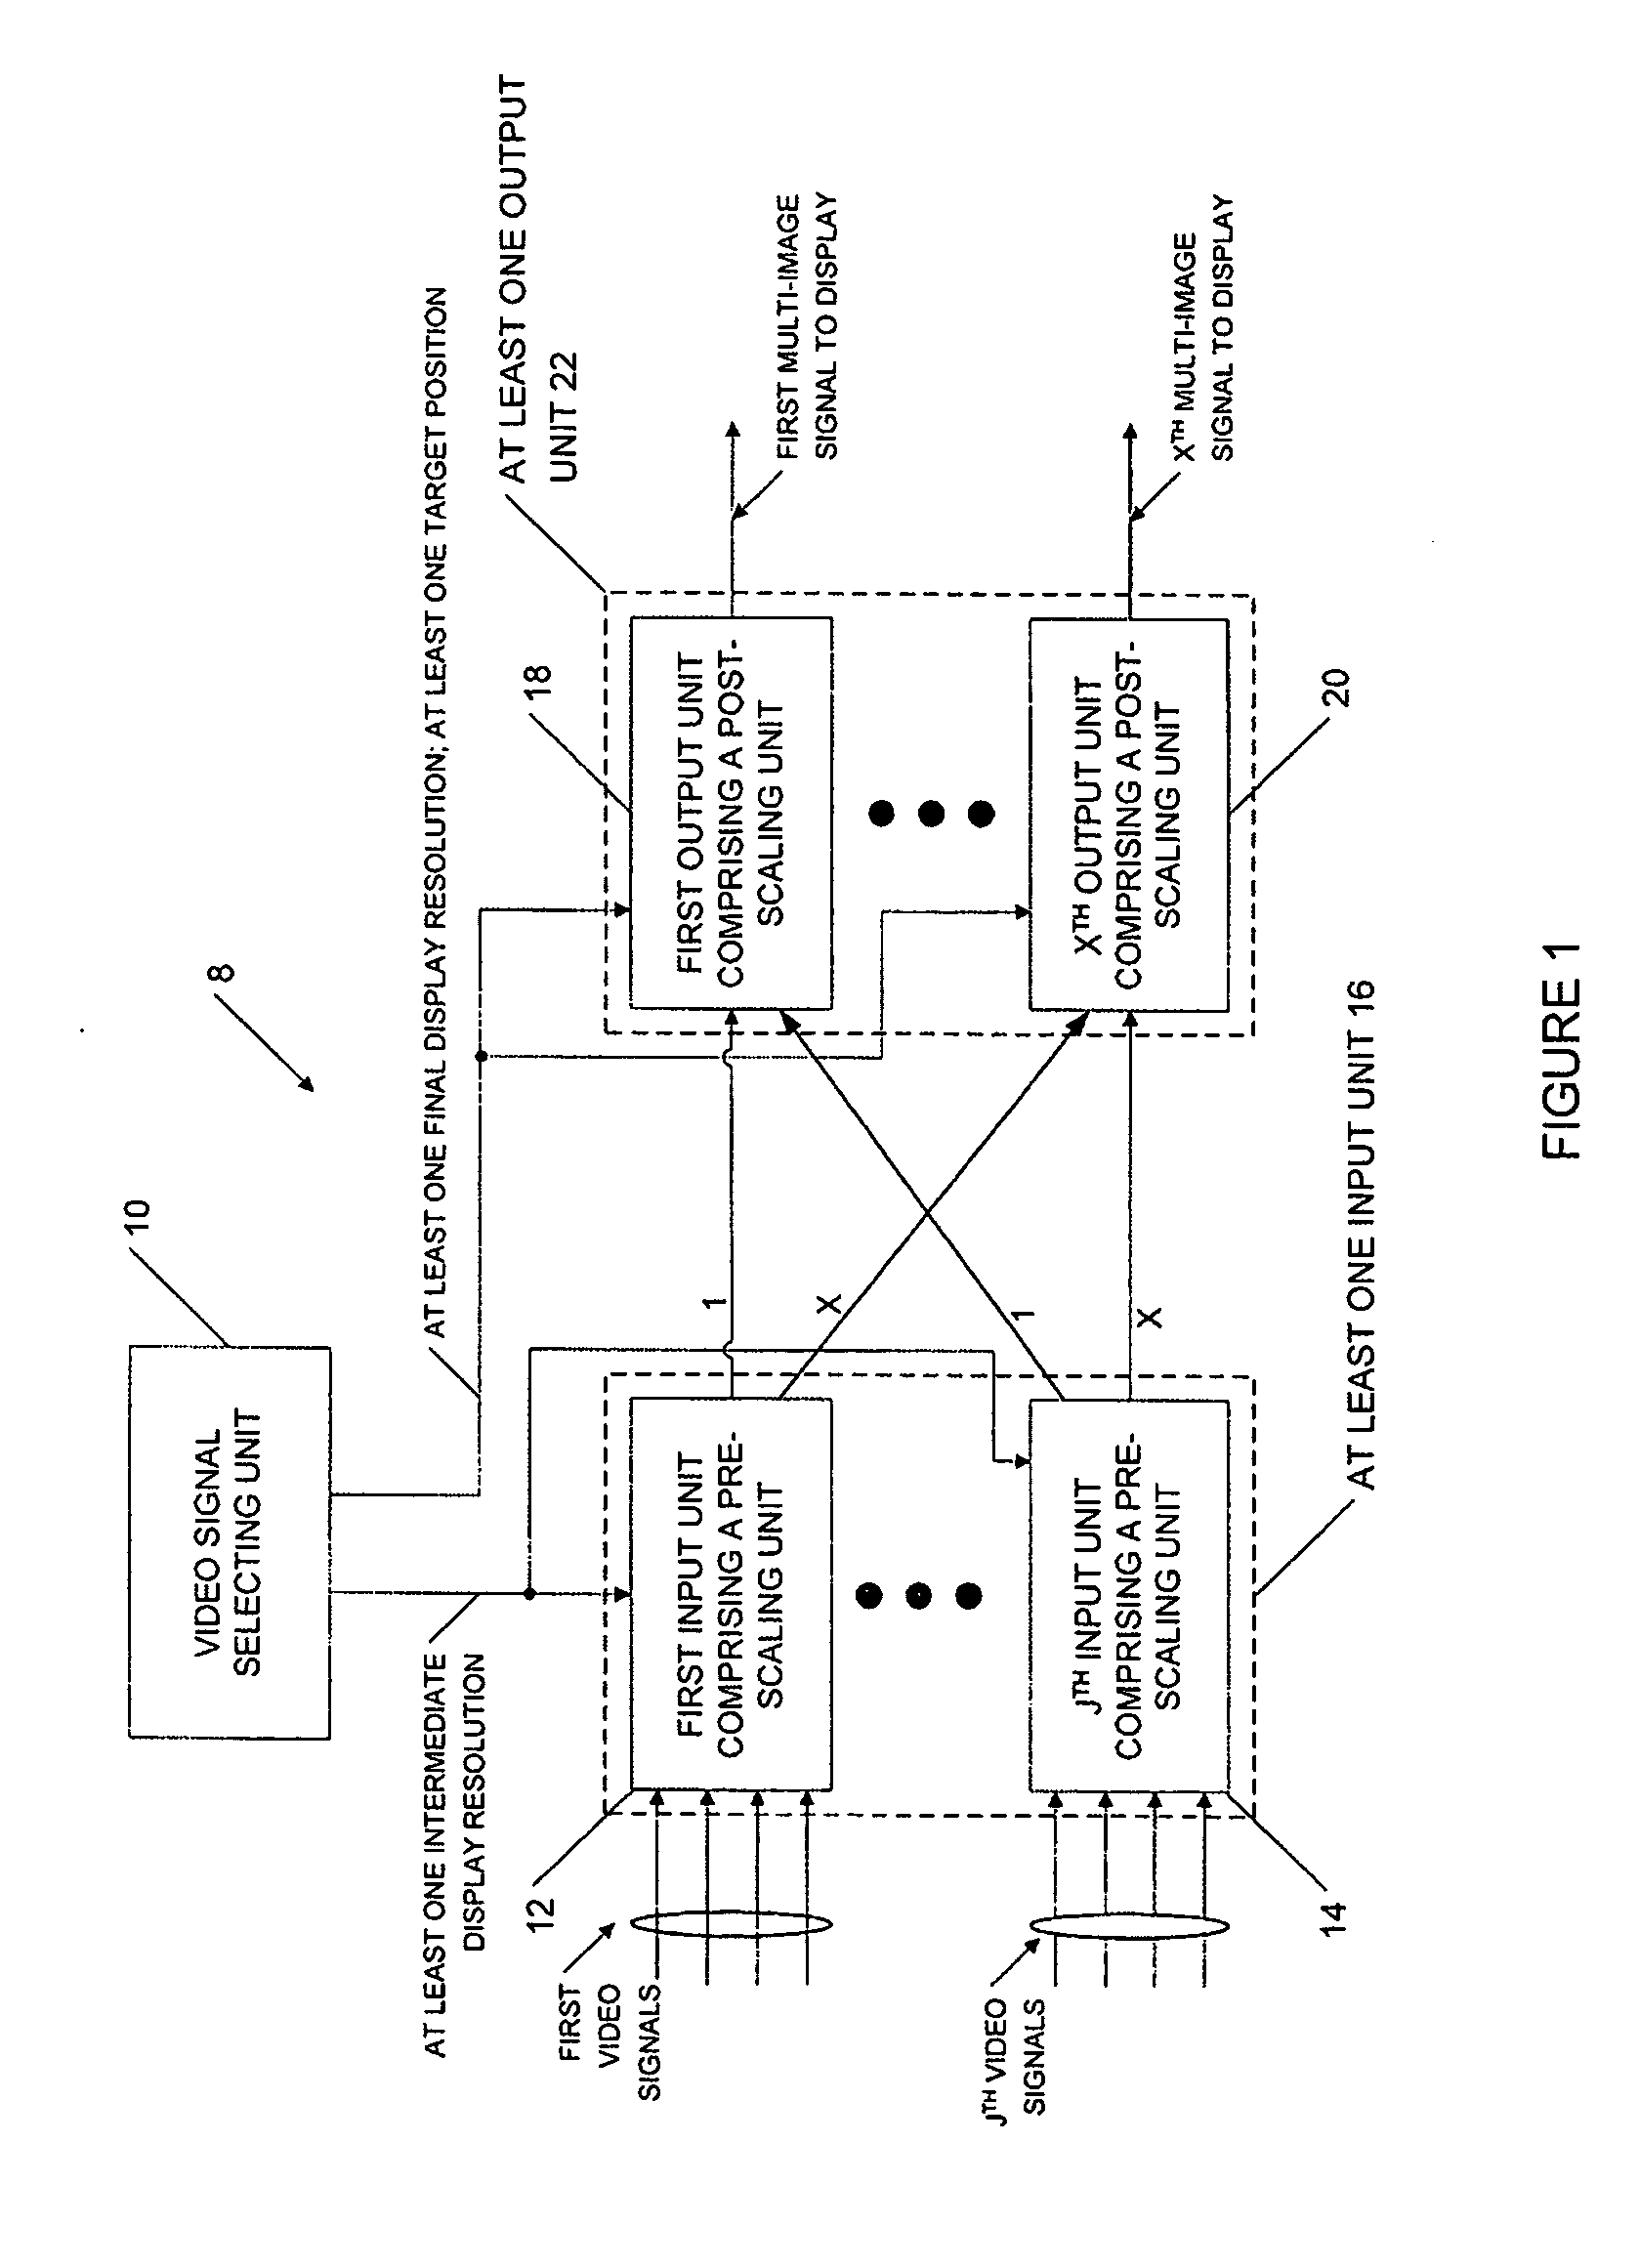 Method and apparatus for displaying at least one video signal on at least one display